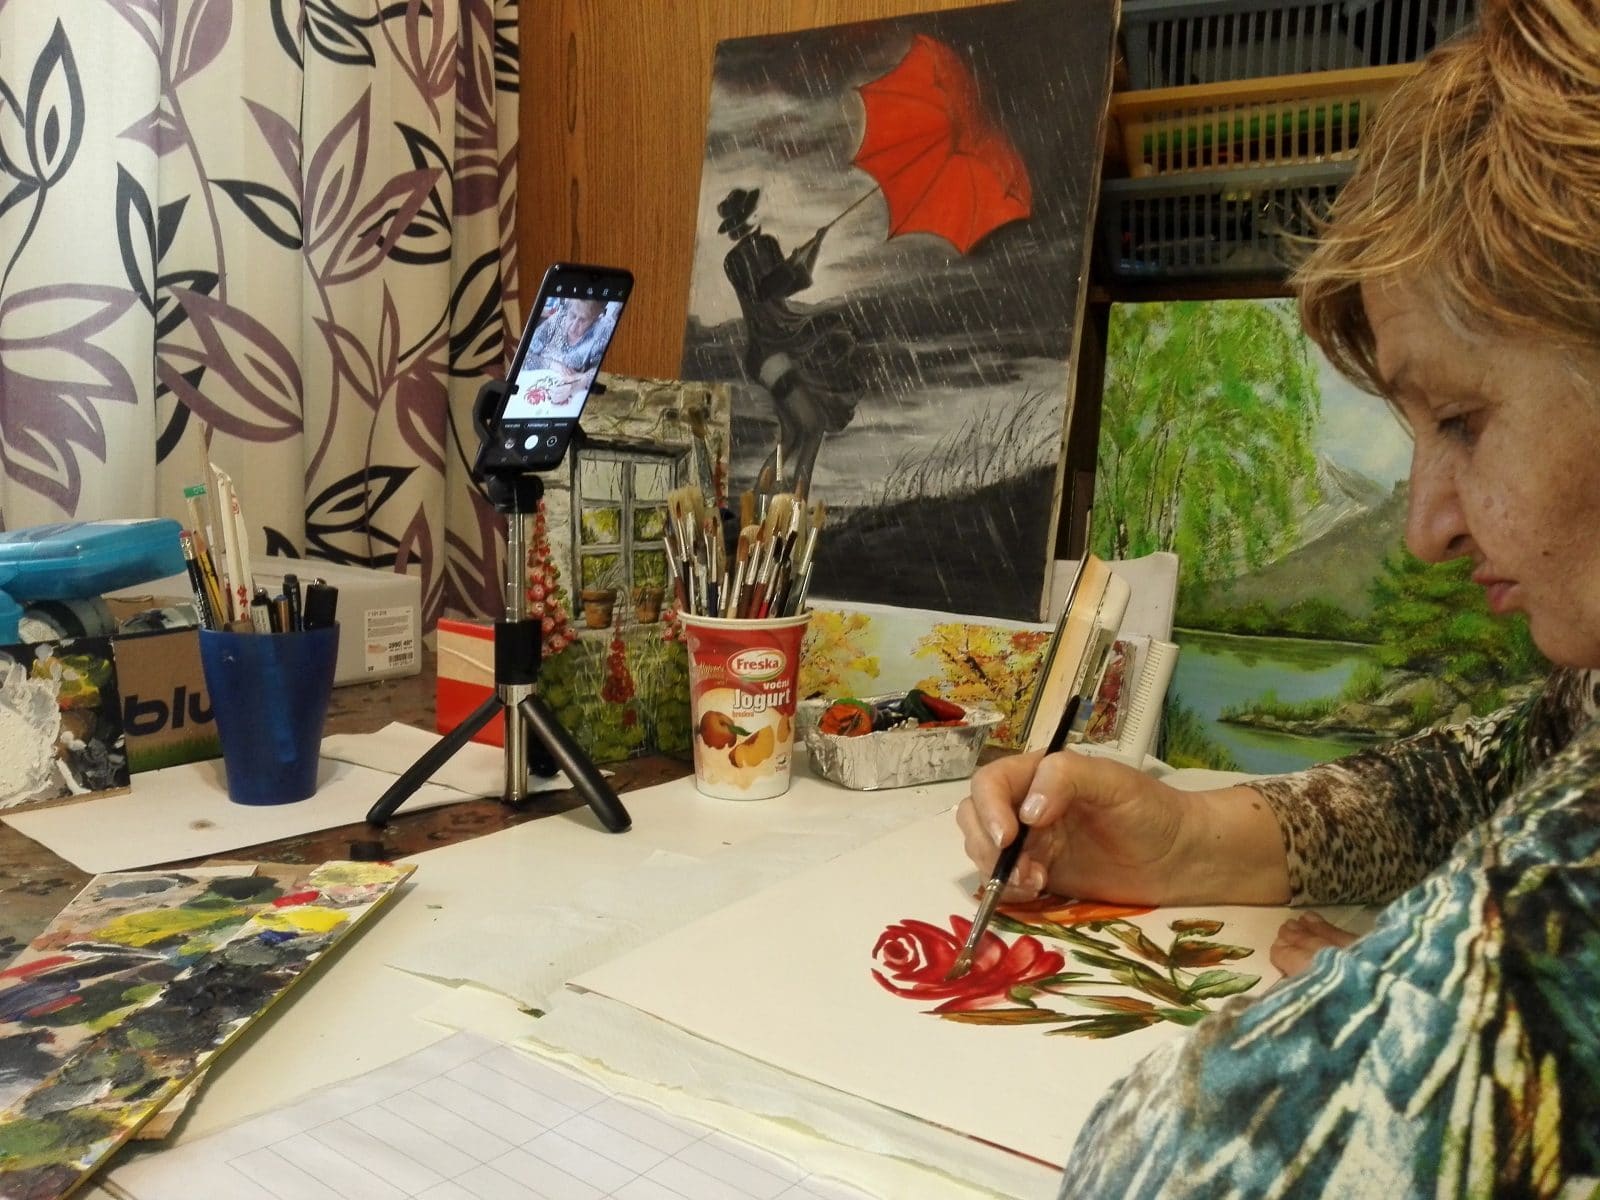 Online Art Keeps Bosnia’s Isolated Seniors Connected in Pandemic